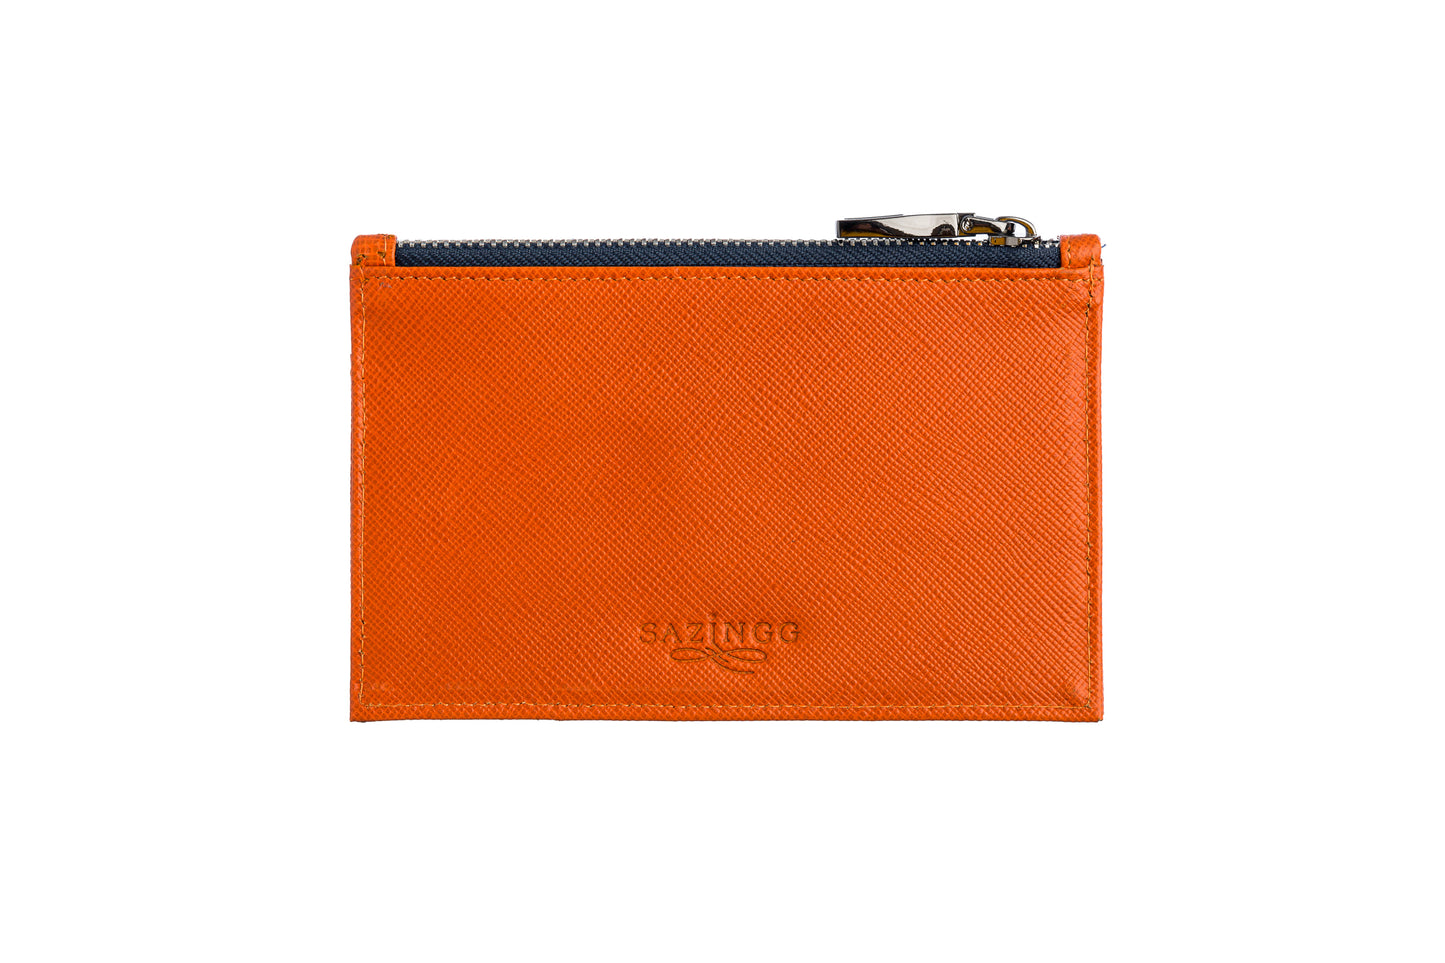 Load image into Gallery viewer, Credit Card Zip Pouch in Orange Textured Leather
